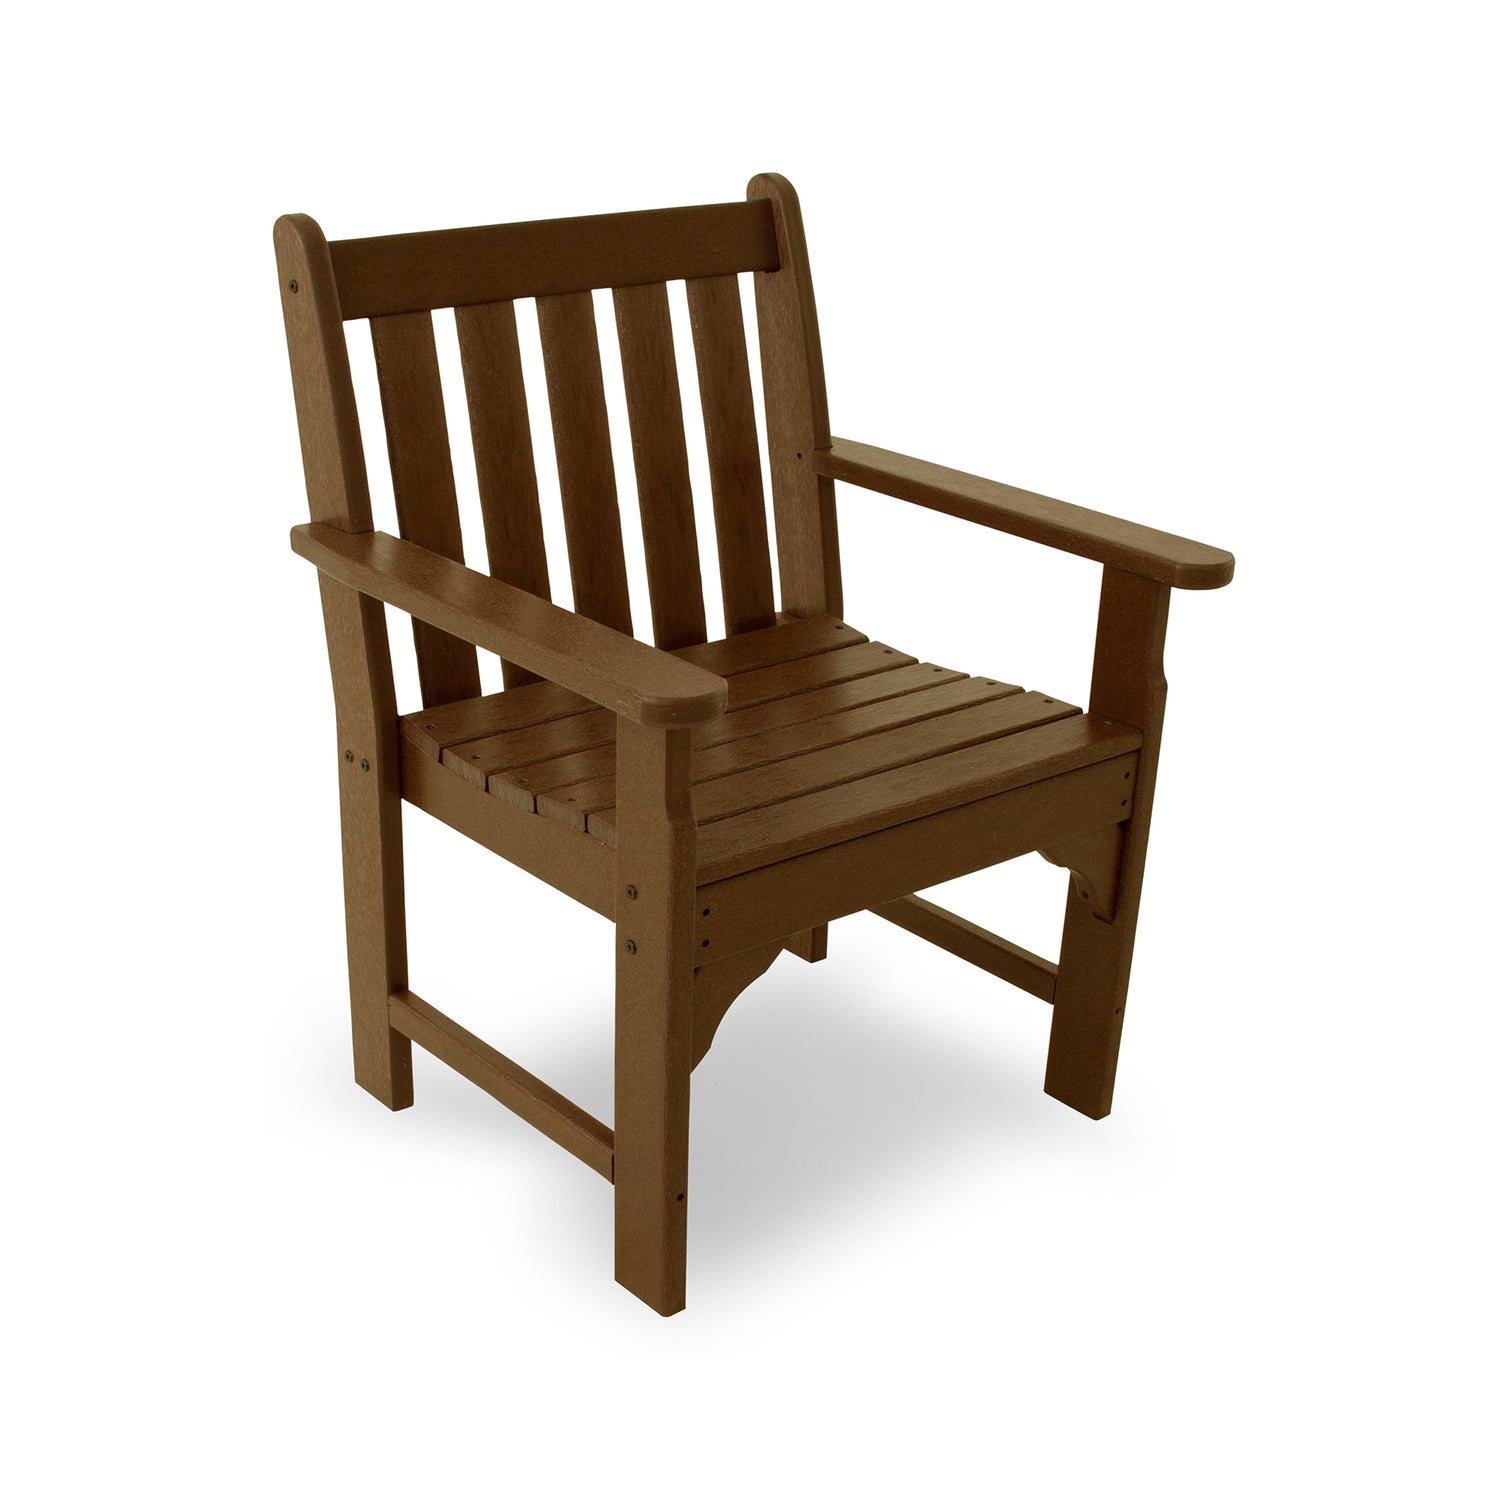 A brown POLYWOOD® Vineyard Arm Chair isolated on a white background, featuring a slatted back and seat, with sturdy armrests.